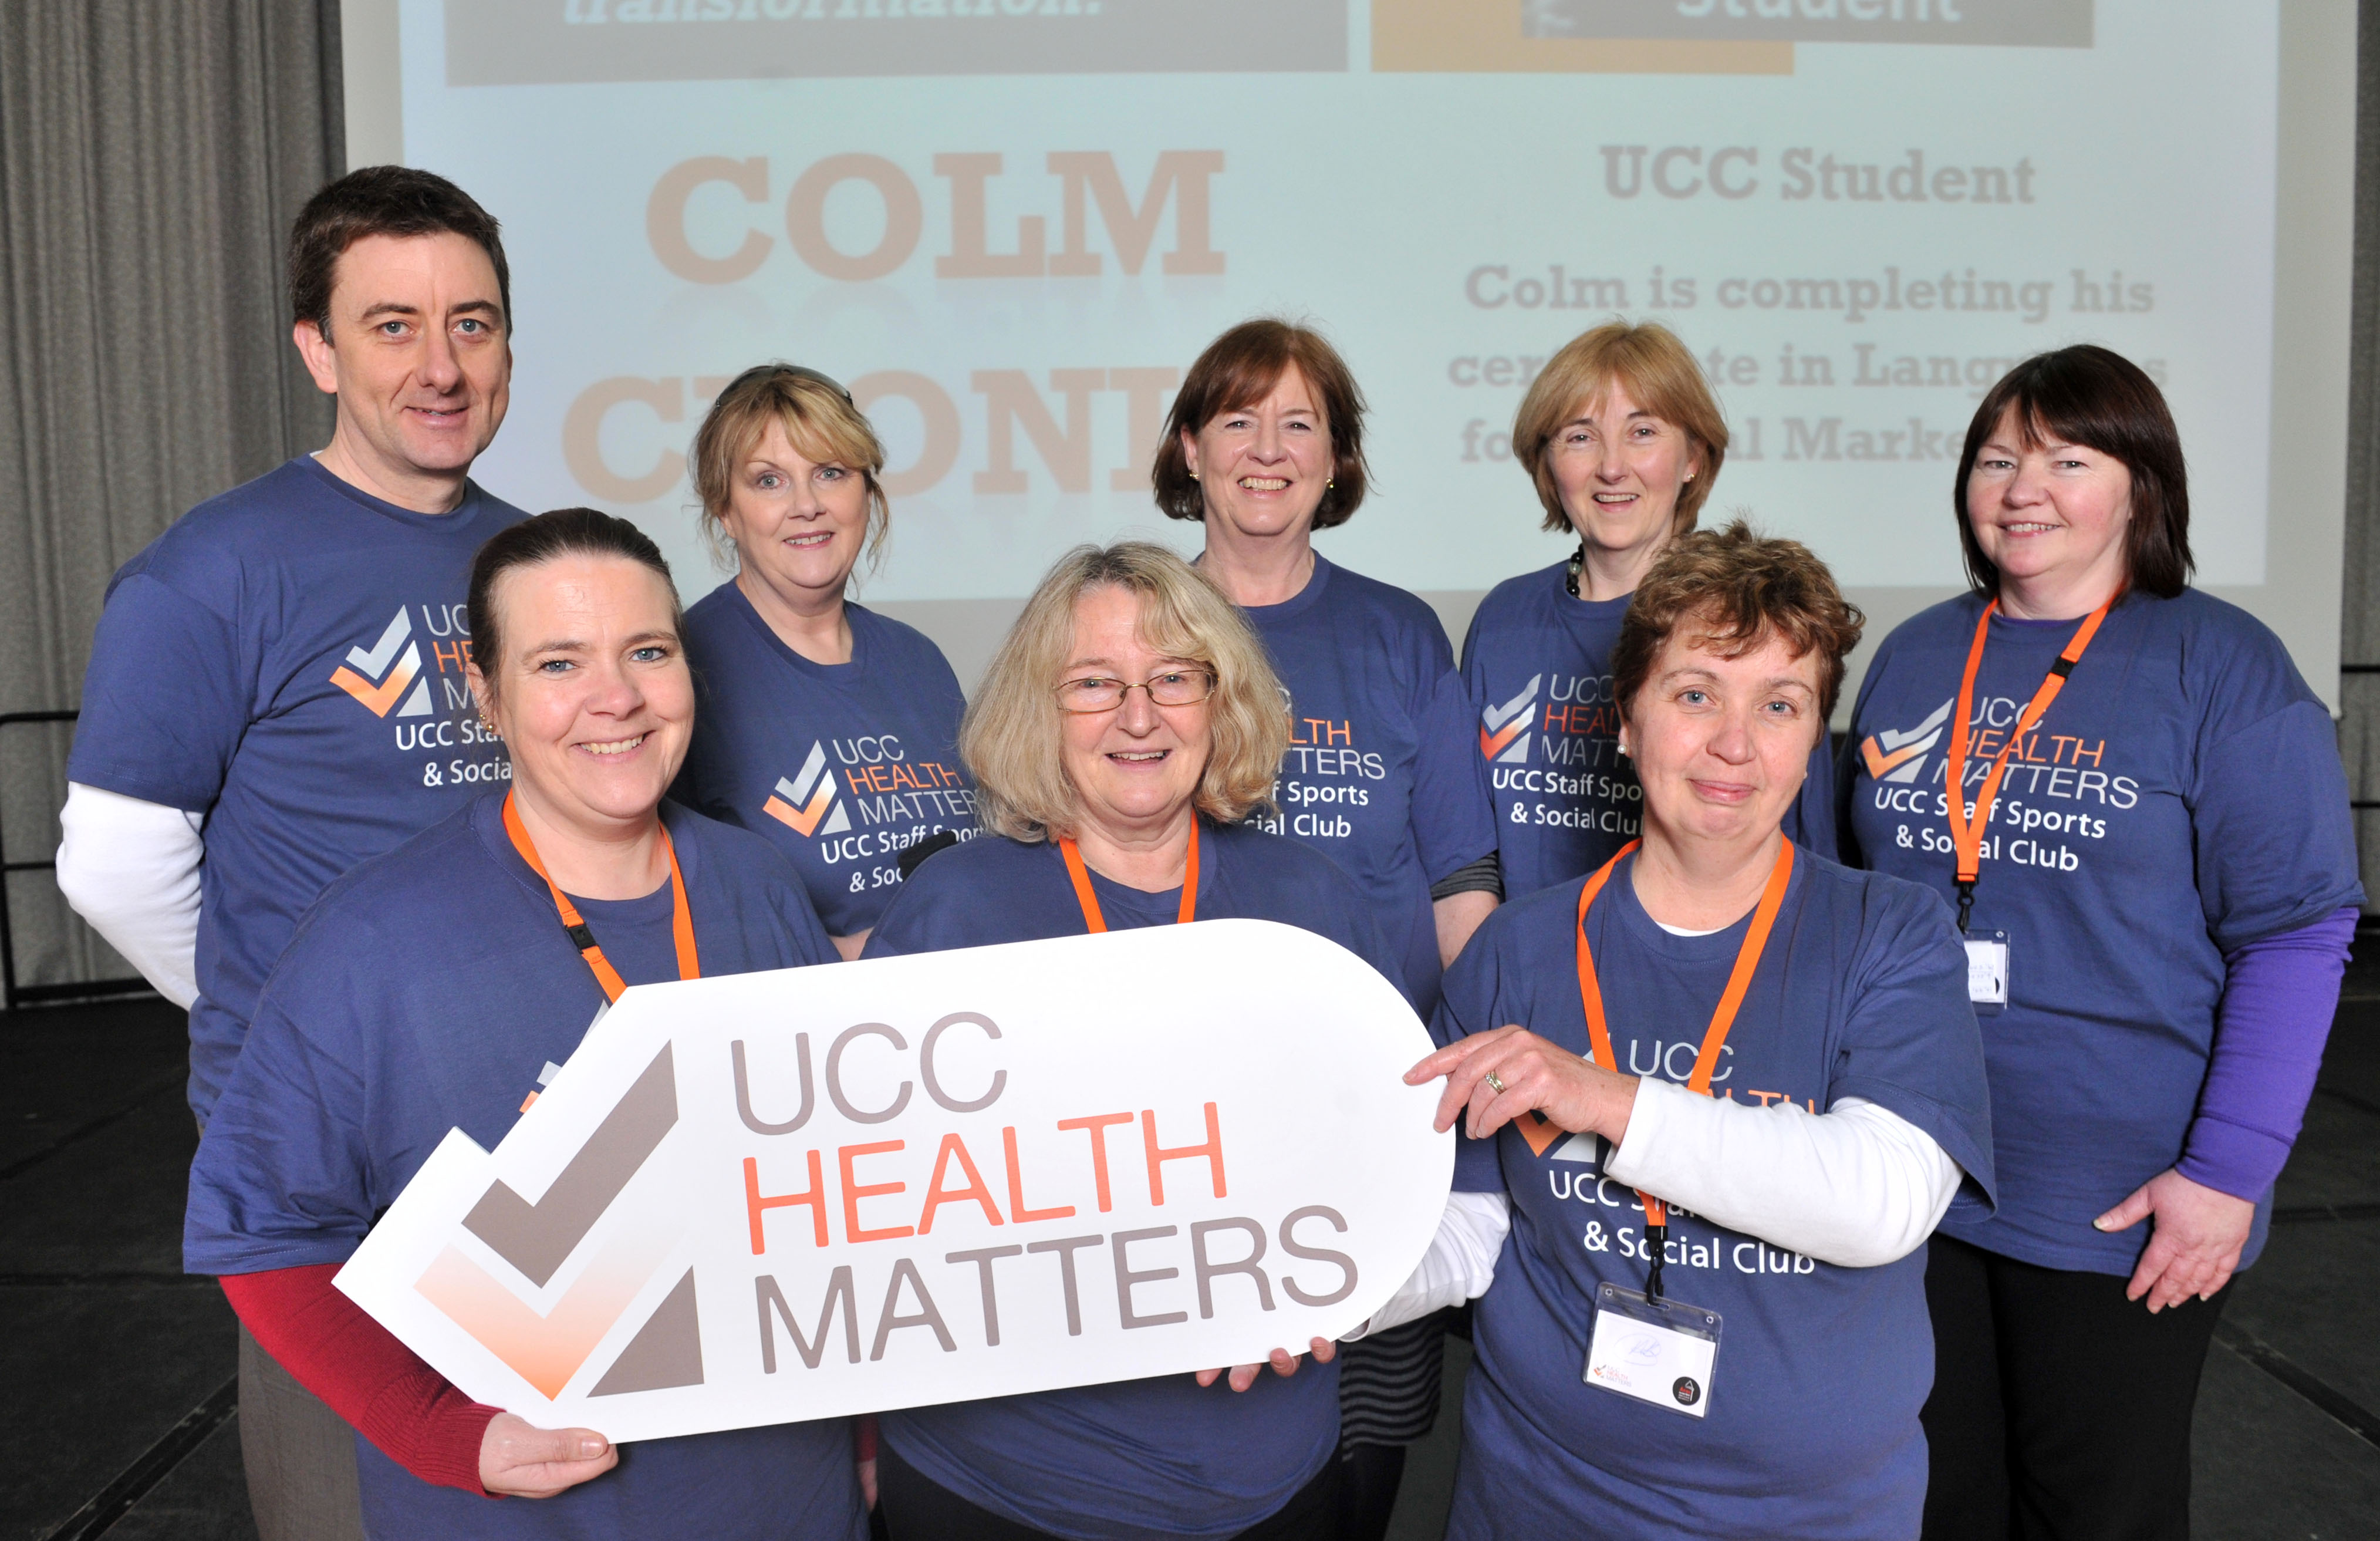 Welcome to UCC Health Matters